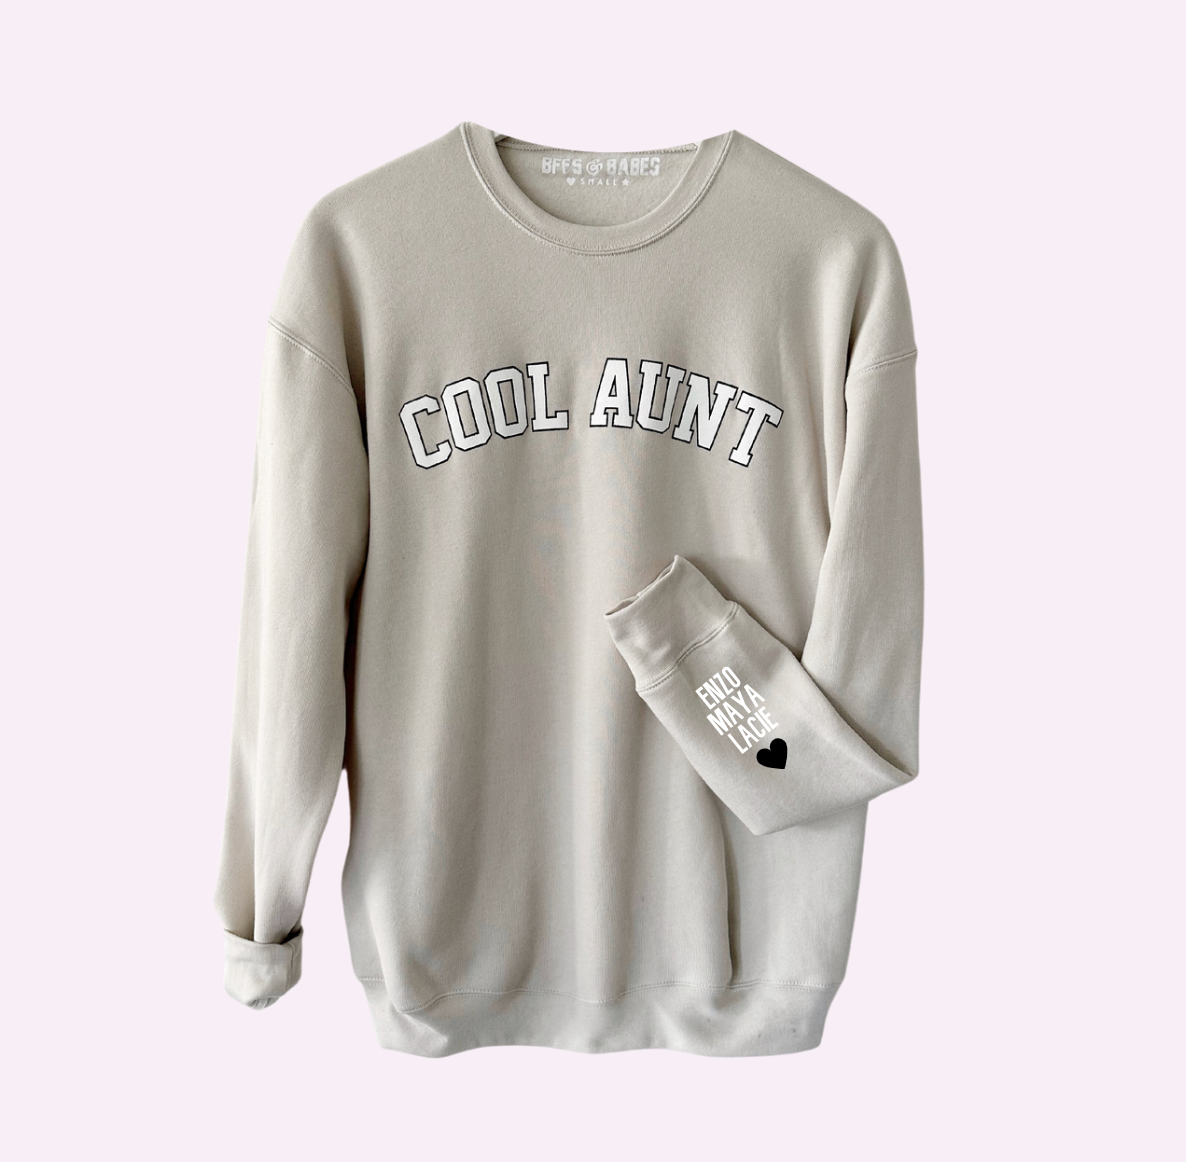 LOVE ON THE CUFF ♡ beige cool aunt sweatshirt with personalized cuff